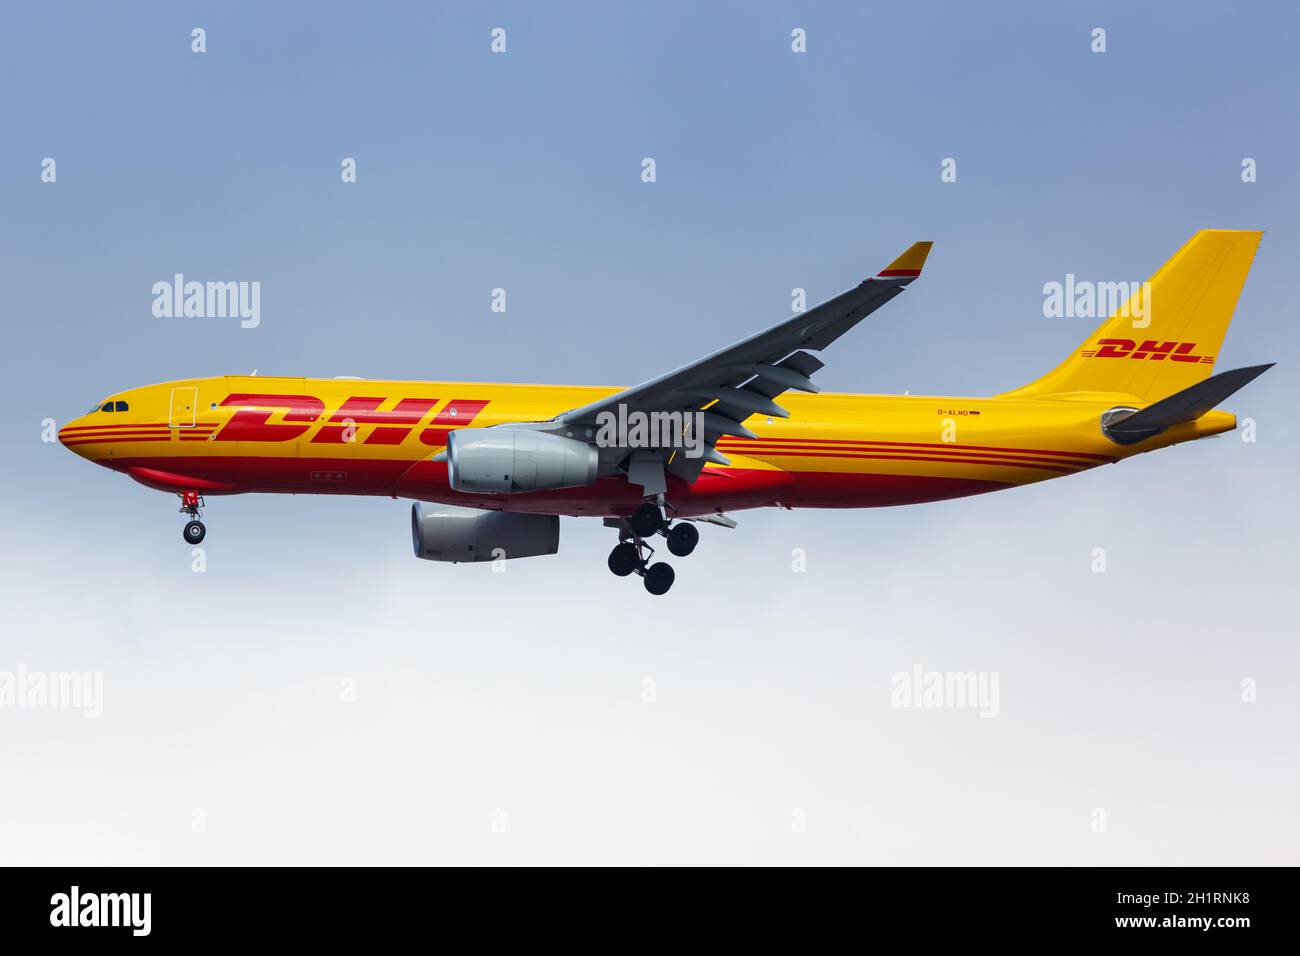 New York, United States - February 29, 2020: DHL European Air Transport Airbus A330-200F airplane at New York JFK airport in the United States. Stock Photo